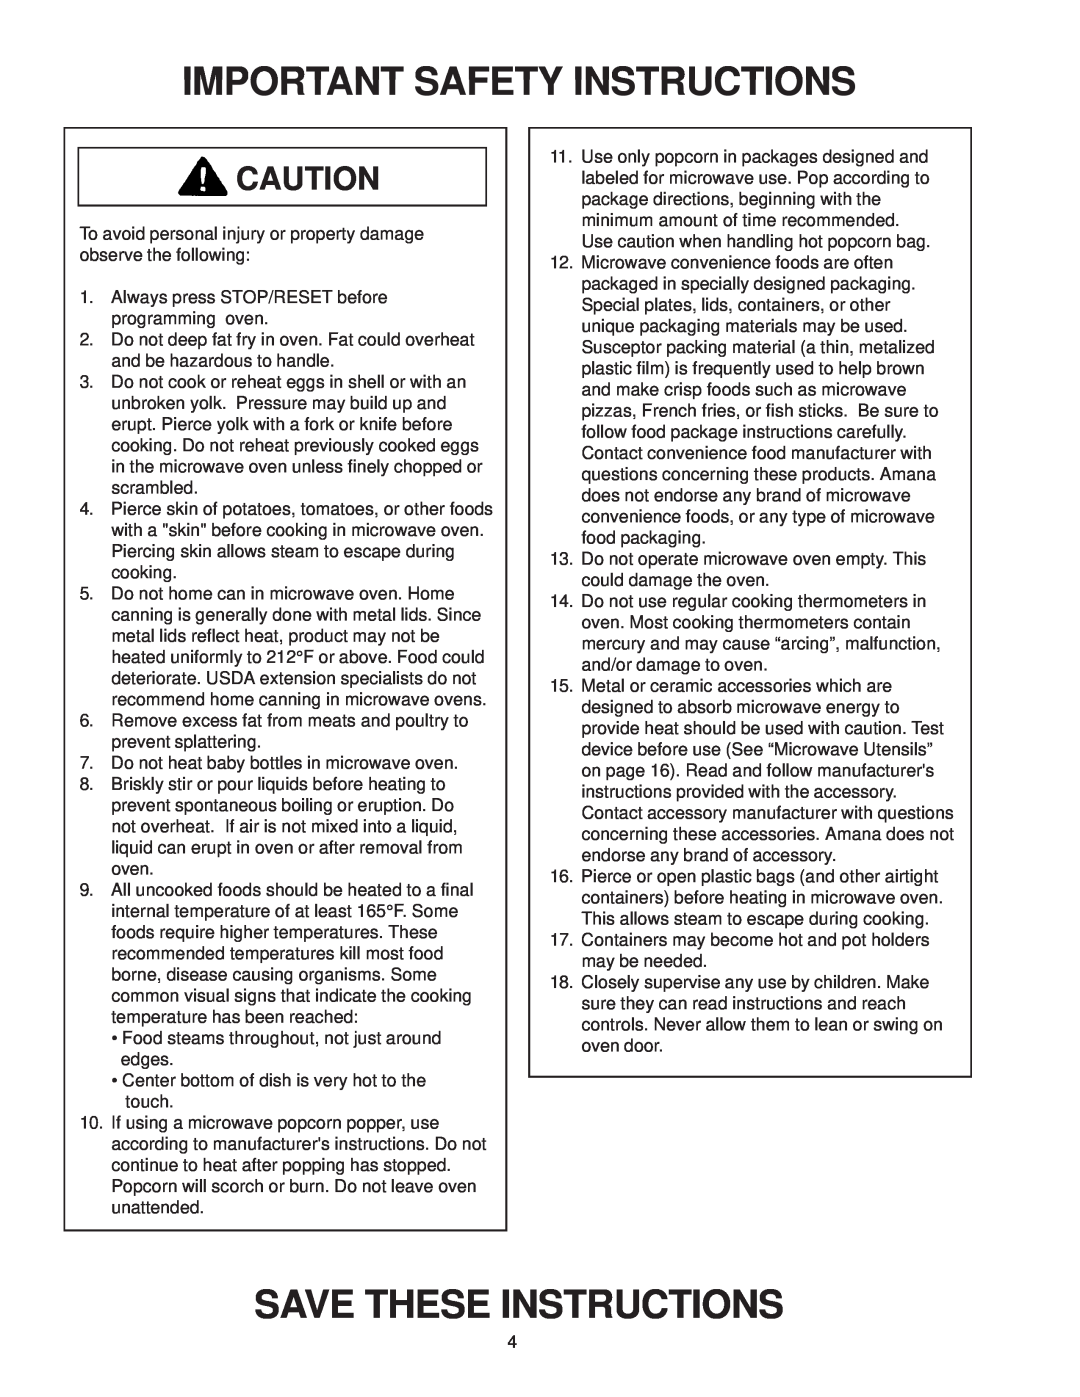 Amana MVH230 Important Safety Instructions, Save These Instructions, Always press STOP/RESET before programming oven 